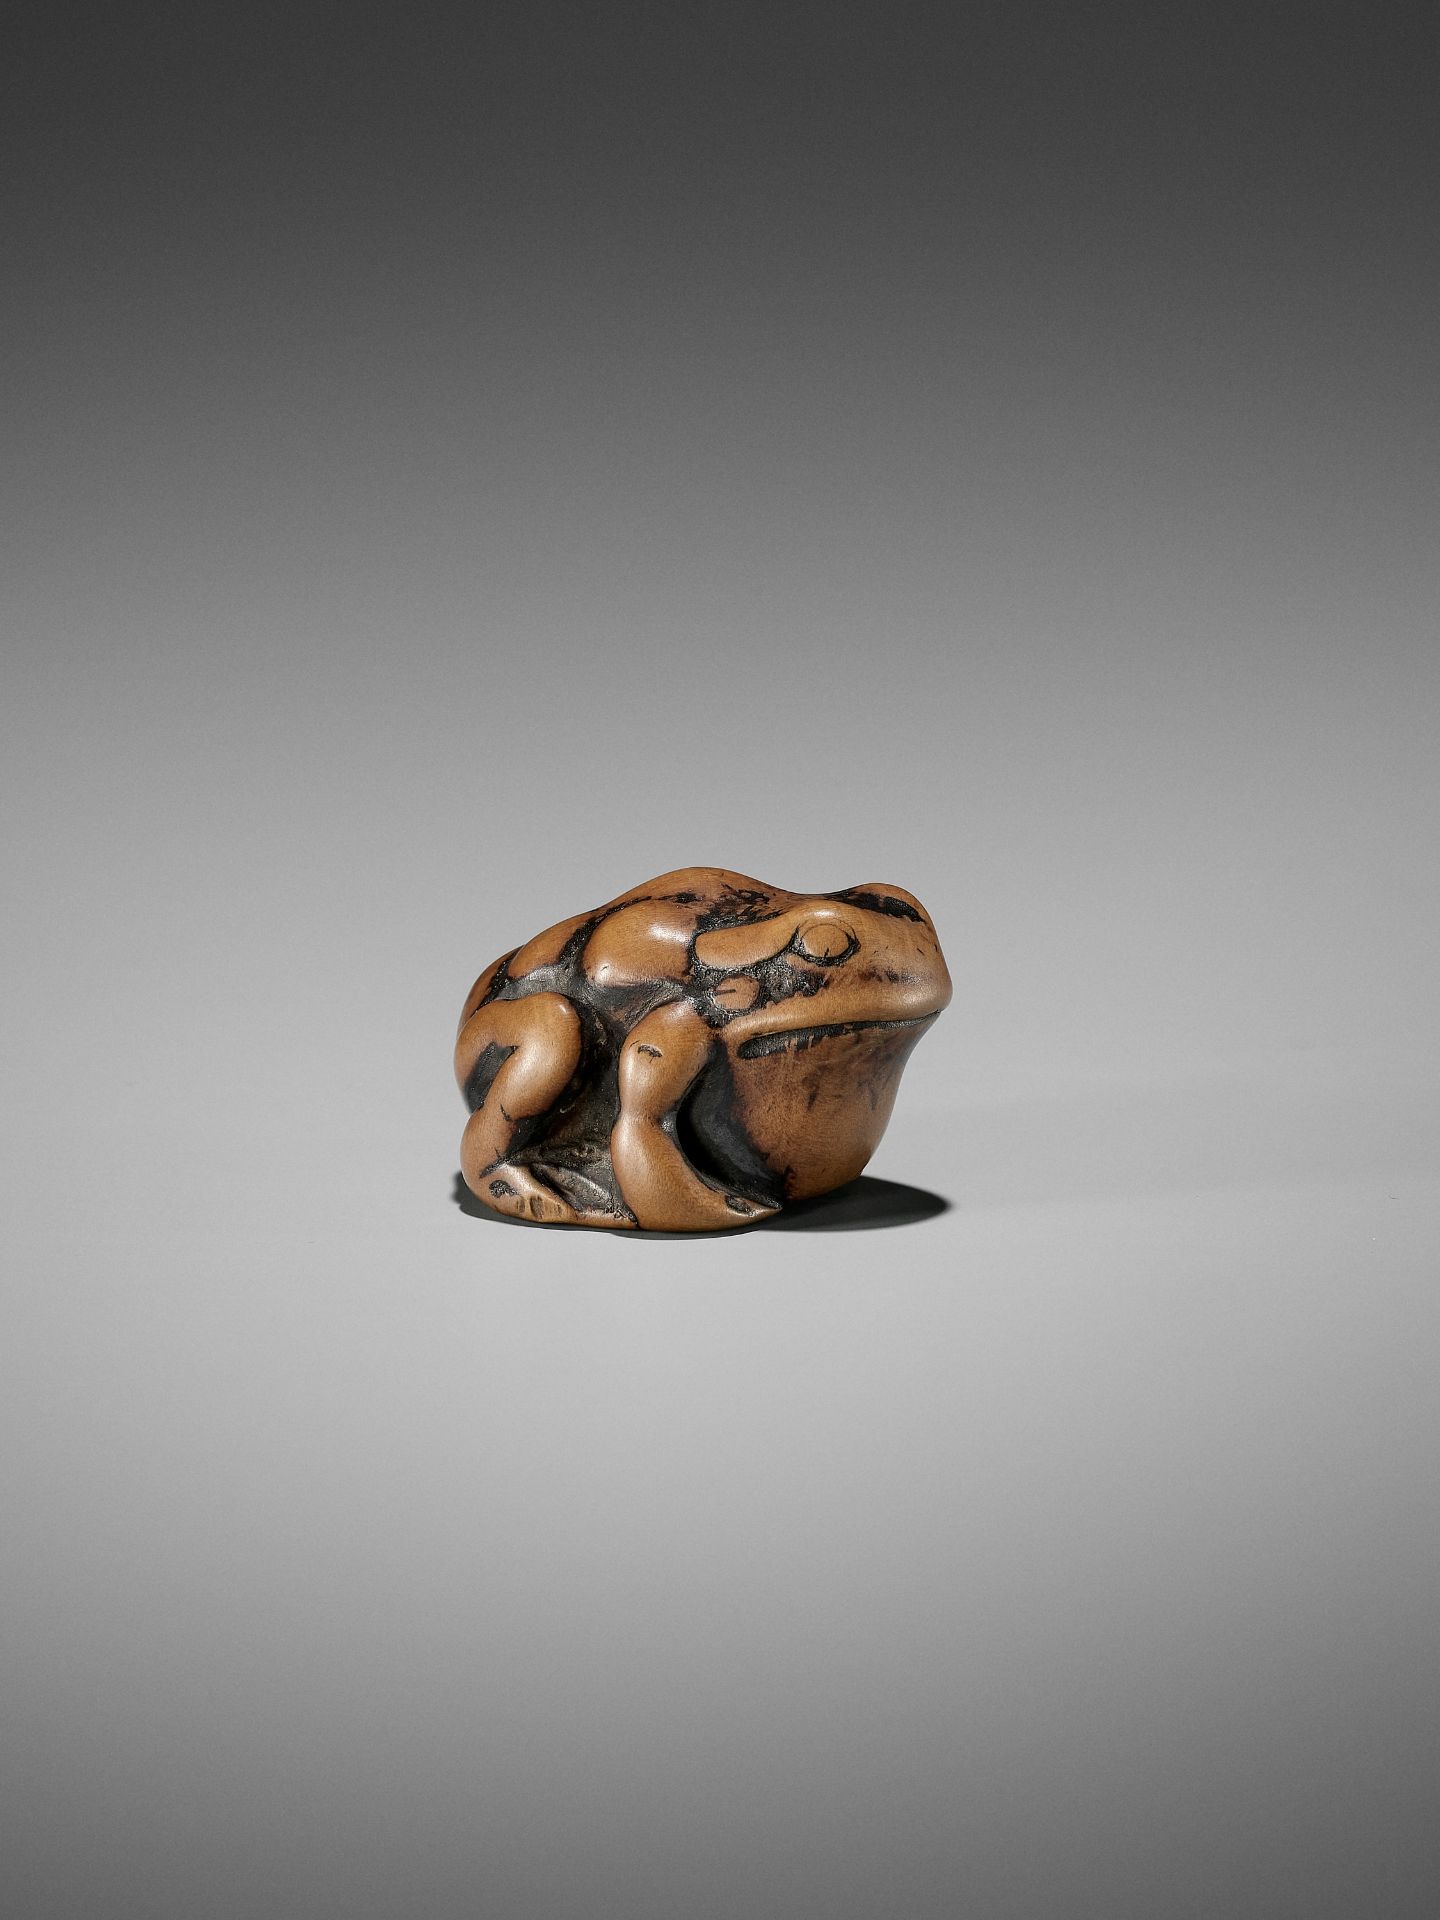 AN EARLY WOOD NETSUKE OF A TOAD - Image 4 of 12